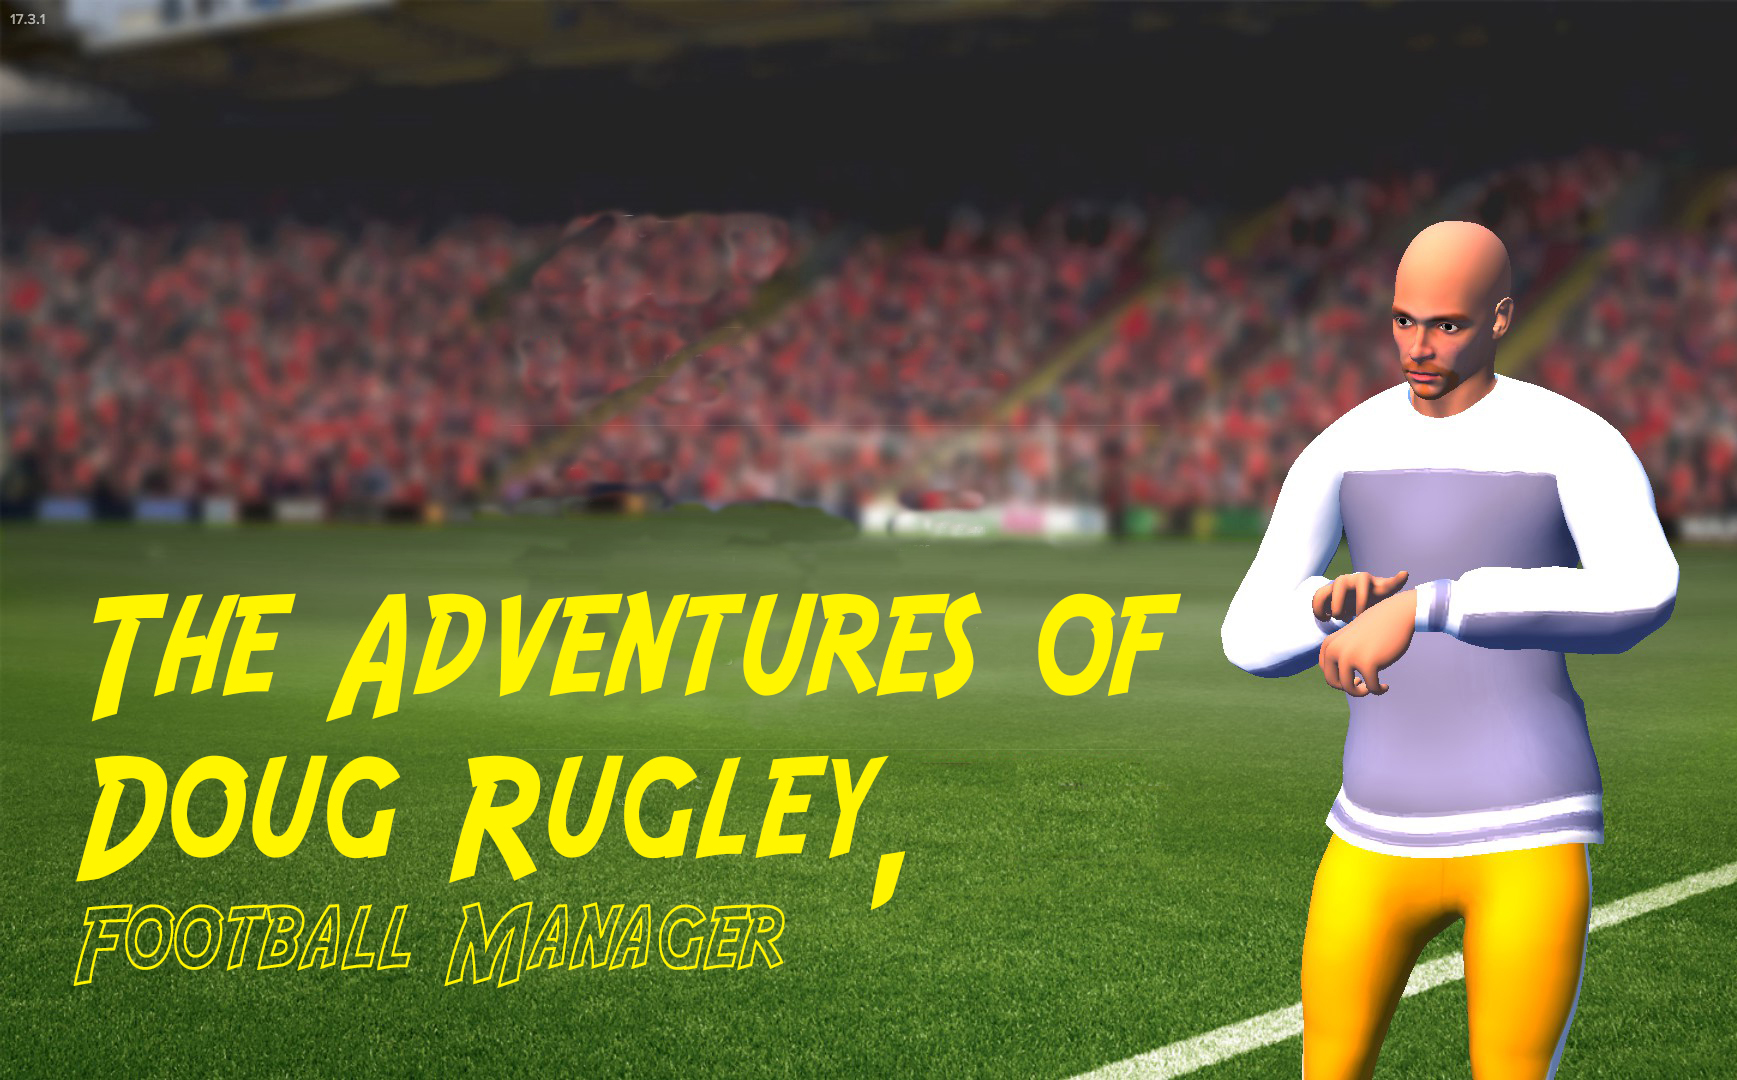 The Adventures of Doug Rugley, Football Manager. Episode Four: The Hawks, Triumphant